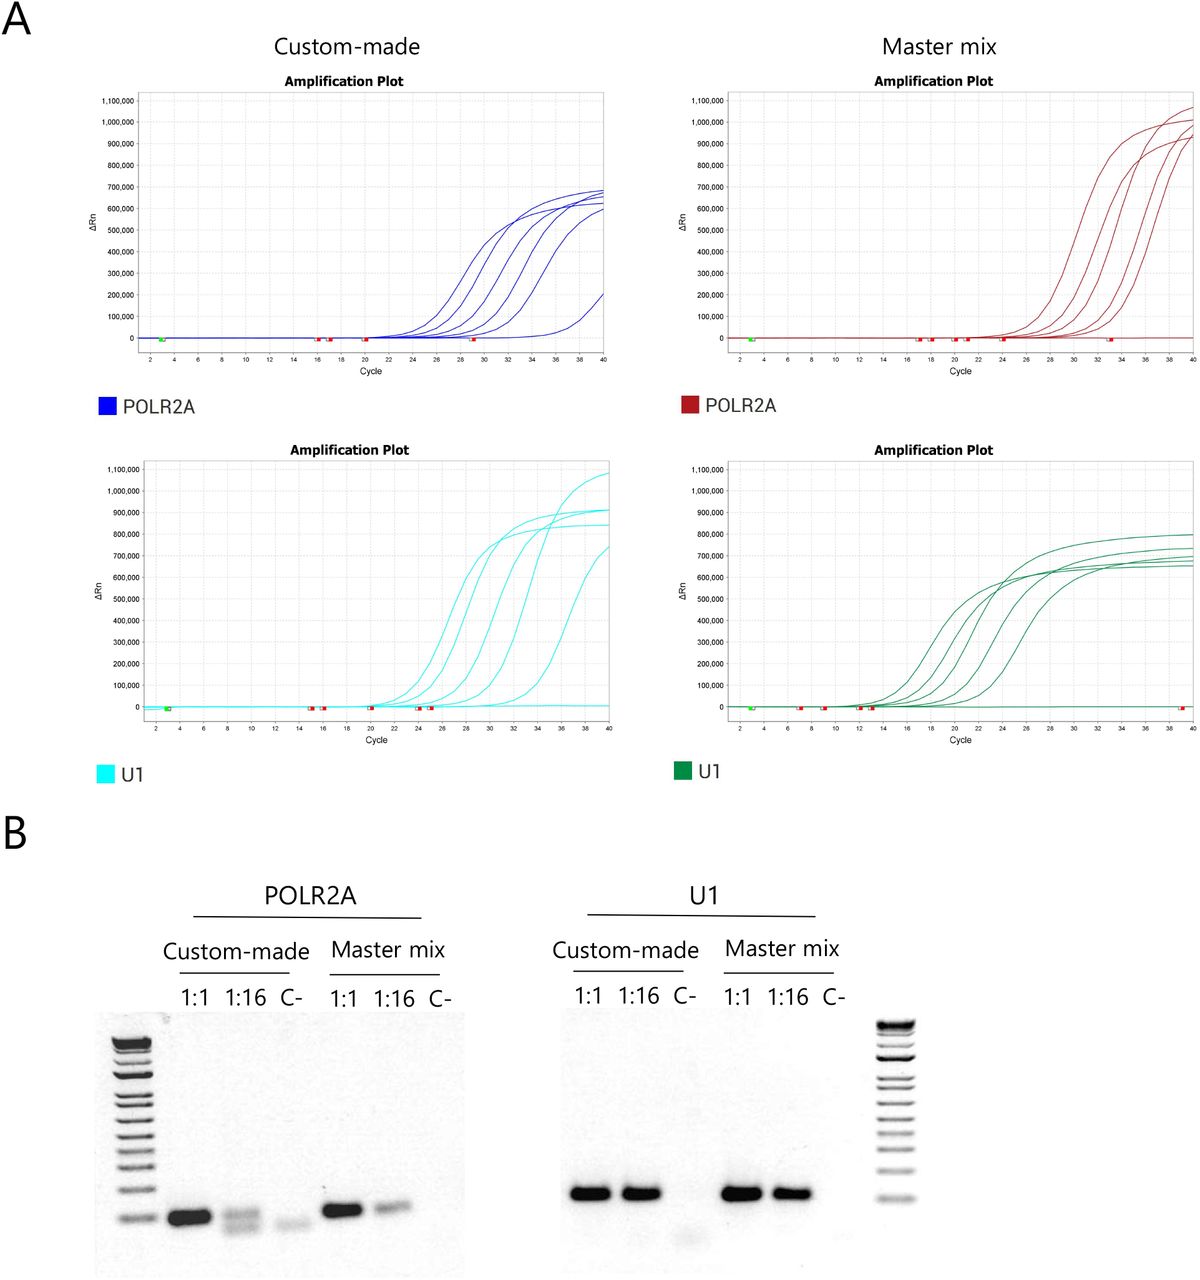 Selection of a human housekeeping gene to be used as internal control. (A) Representative amplification curves for POLR2A and U1 using both the custom-made mix and the INBIO master mix. (B) Agarose gel electrophoresis of the products obtained after qPCR of 1:1, 1:16 dilutions and the negative control respectively, for each primer pair using both mixes. 